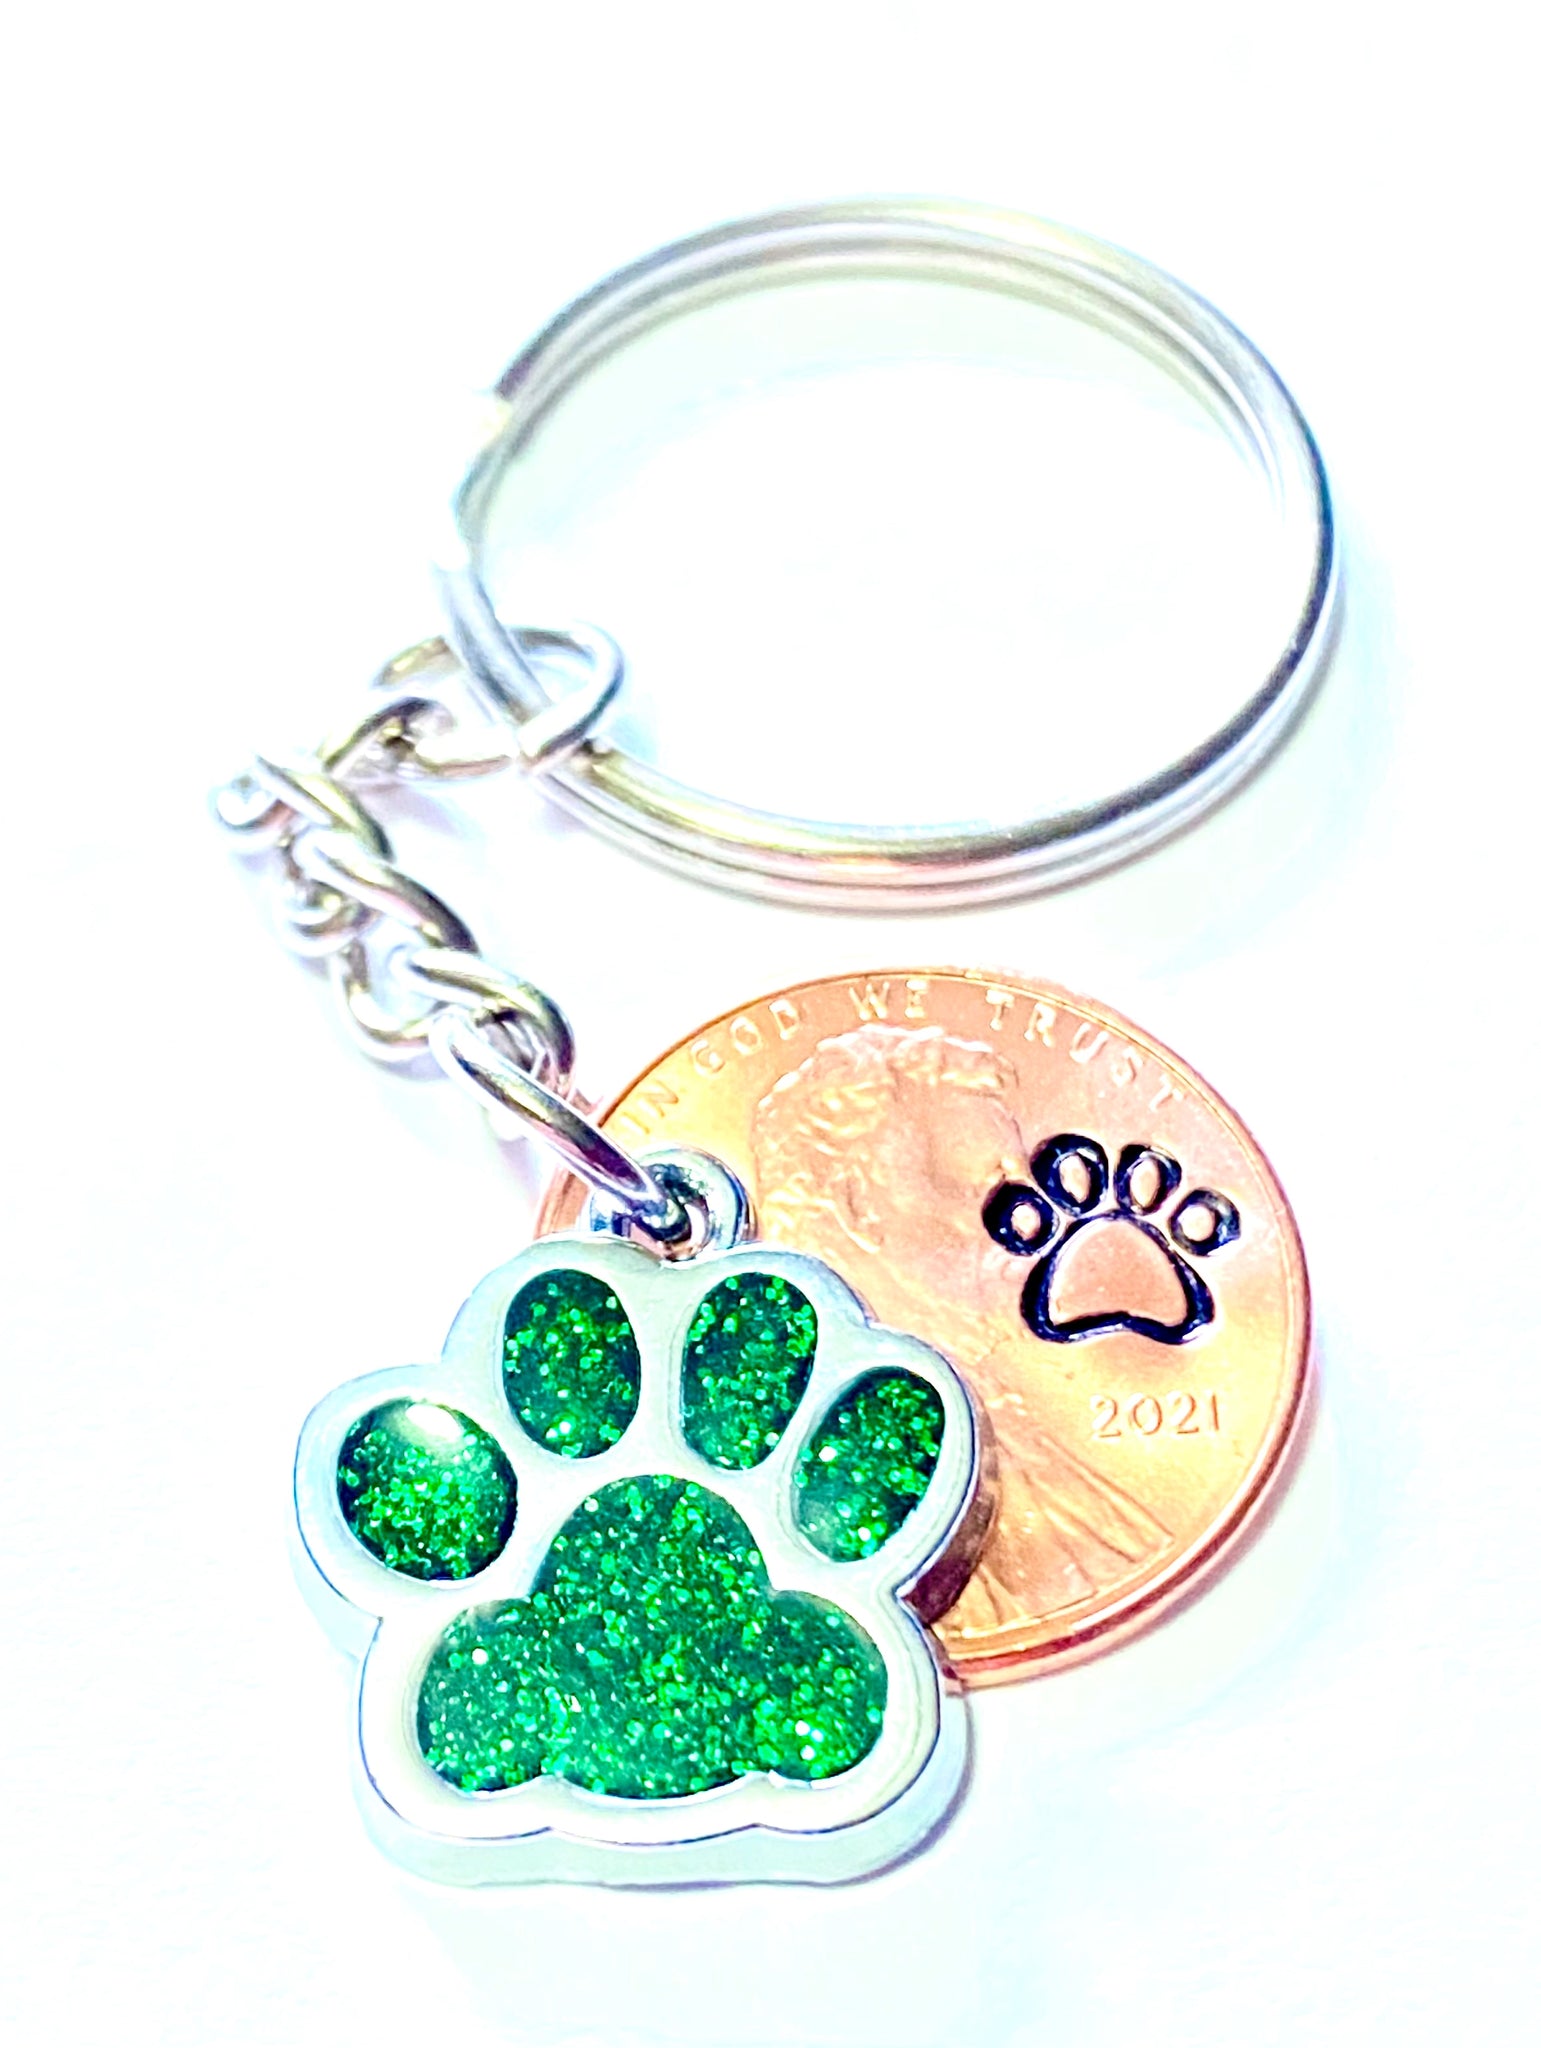 Green Dog Paw Print Charm Lucky Penny Keychain with an engraved dog paw design above the date of a Lincoln Cent.